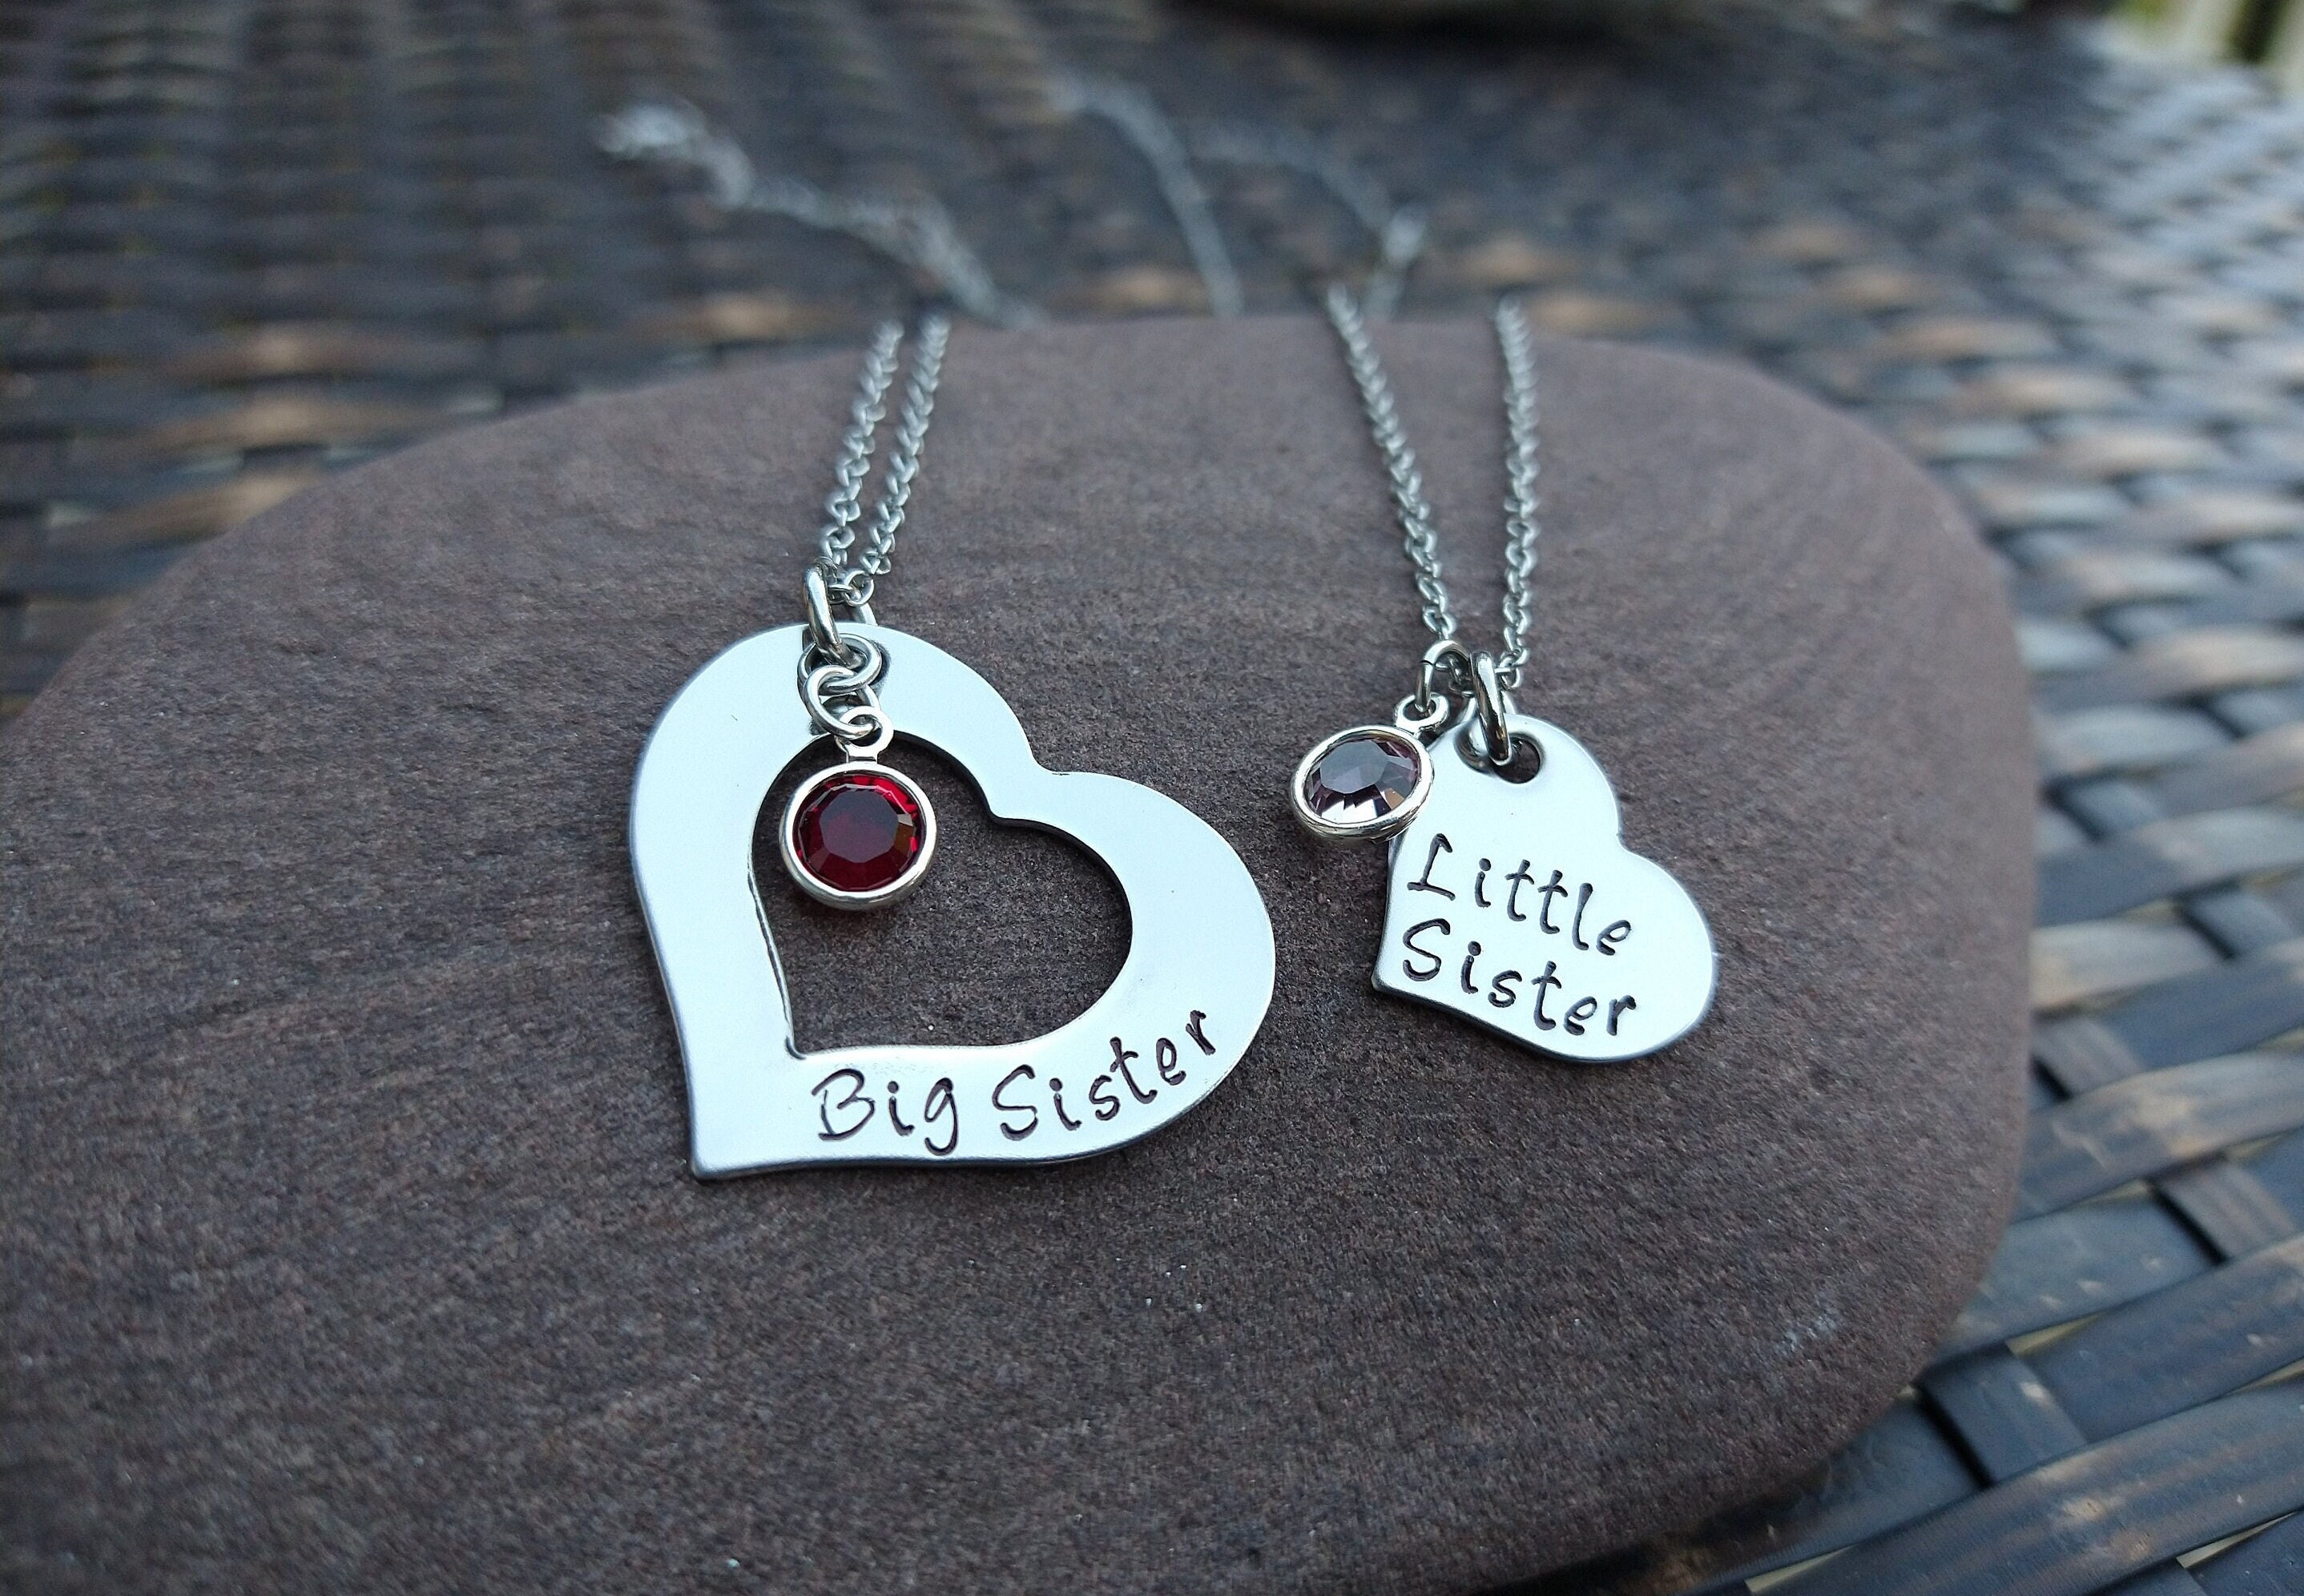 Mom, Big Sis, & Lil Sis Heart Pendant Necklaces - 3 Pack | Claire's US